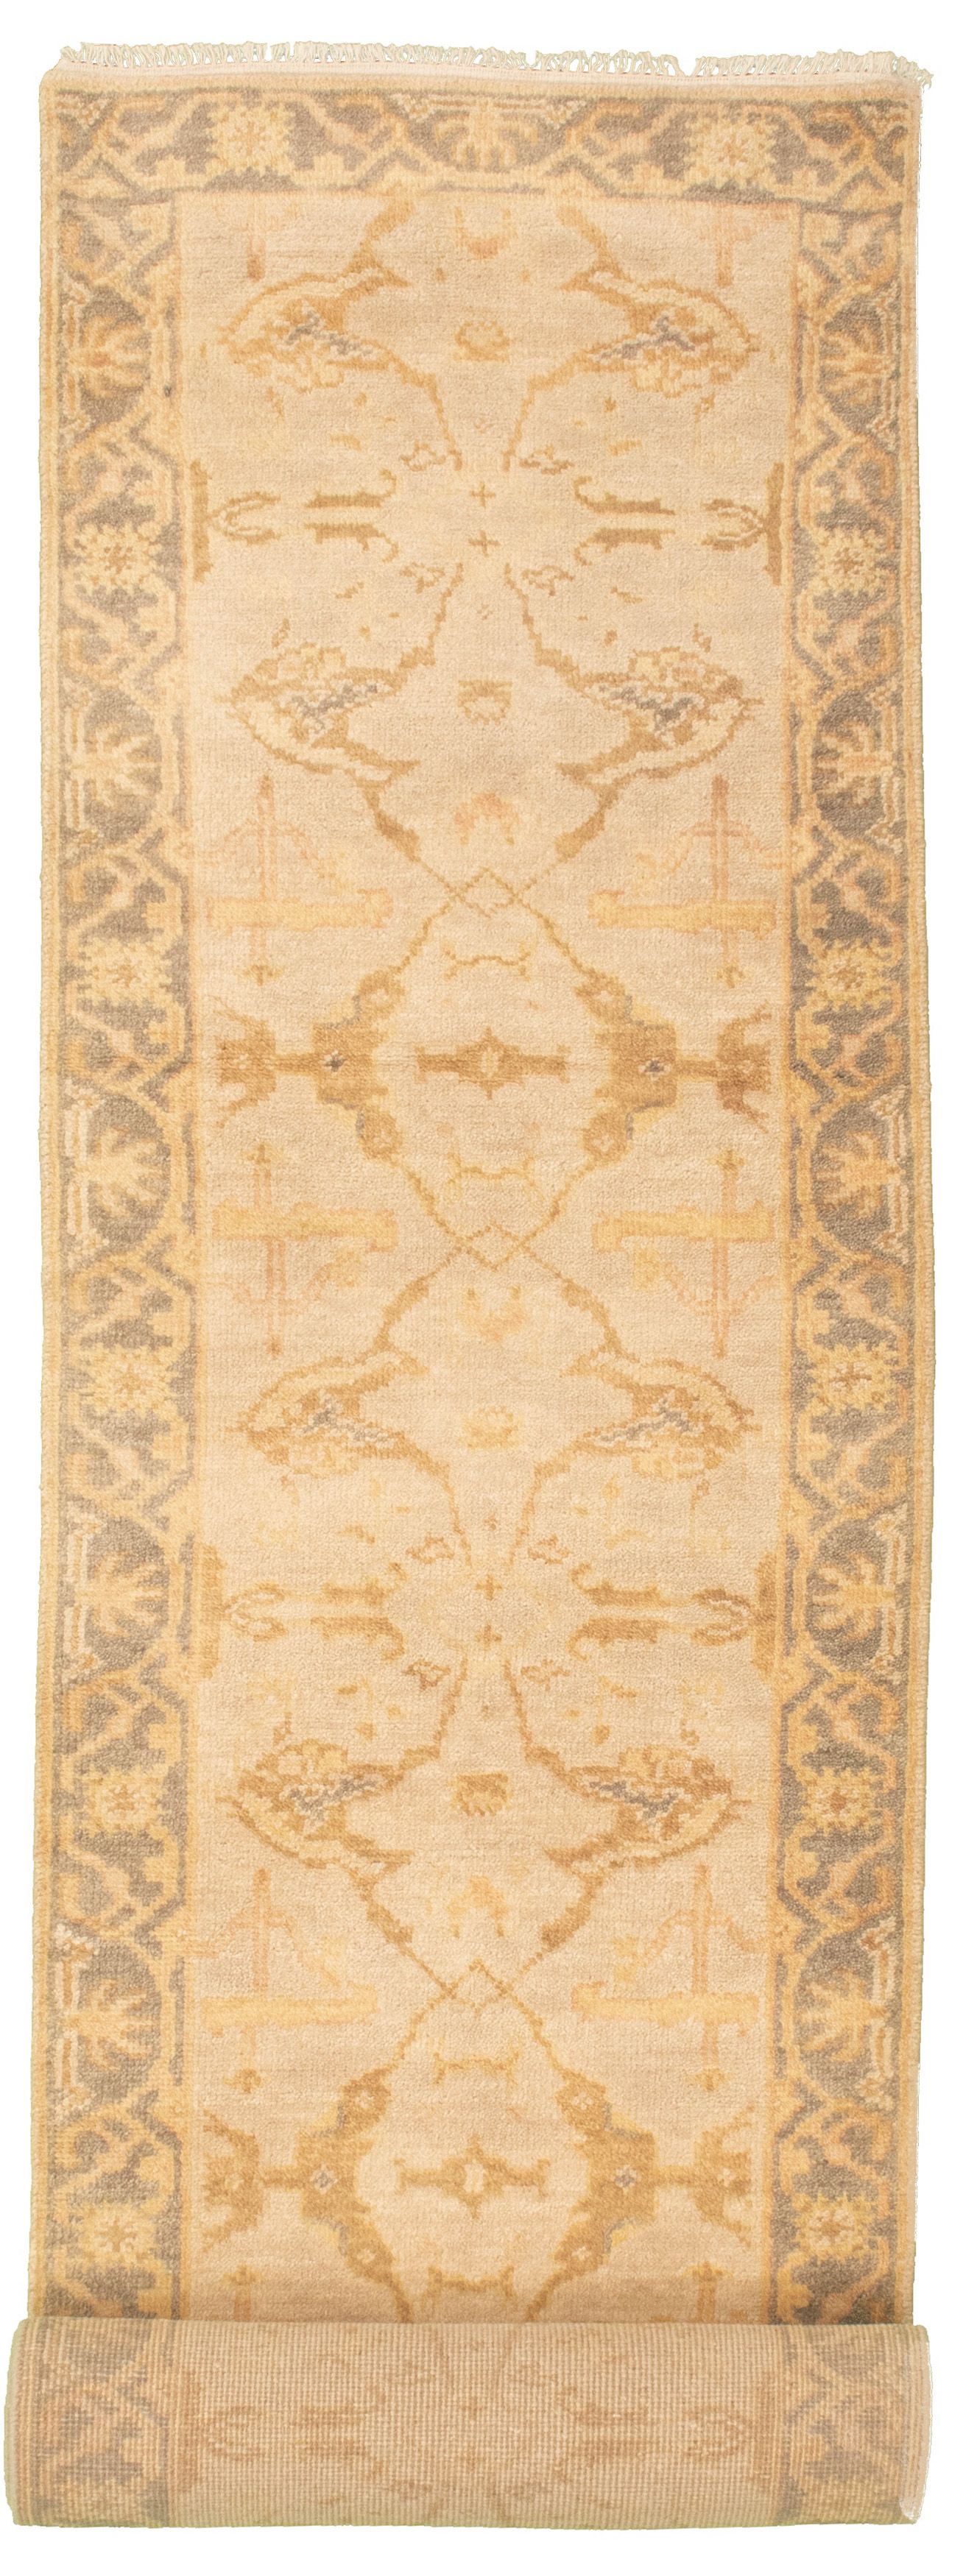 Hand-knotted Royal Ushak Tan Wool Rug 2'9" x 15'7" Size: 2'9" x 15'7"  